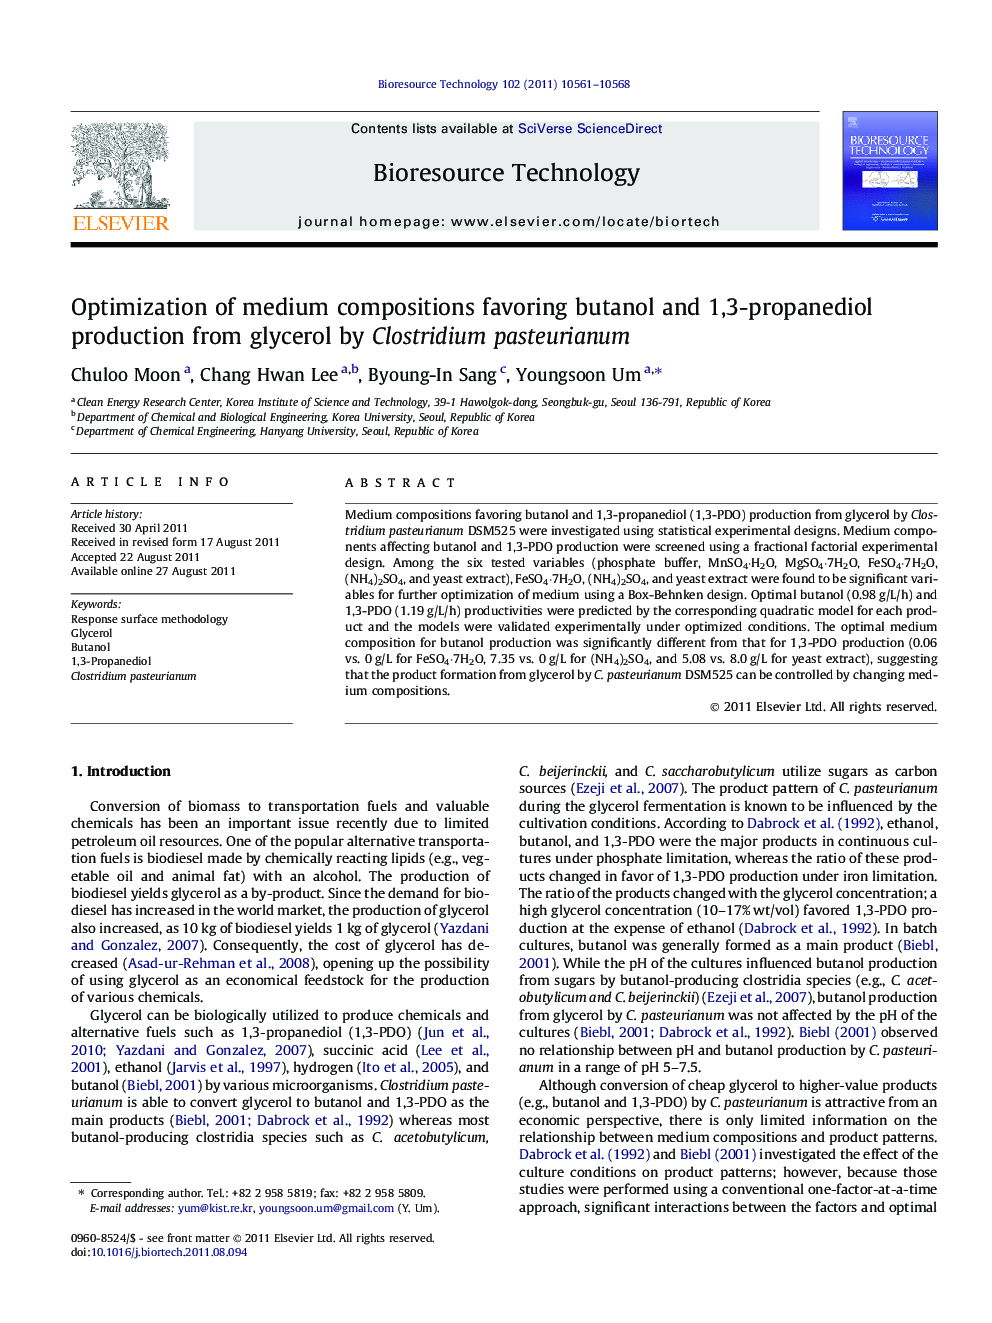 Optimization of medium compositions favoring butanol and 1,3-propanediol production from glycerol by Clostridium pasteurianum